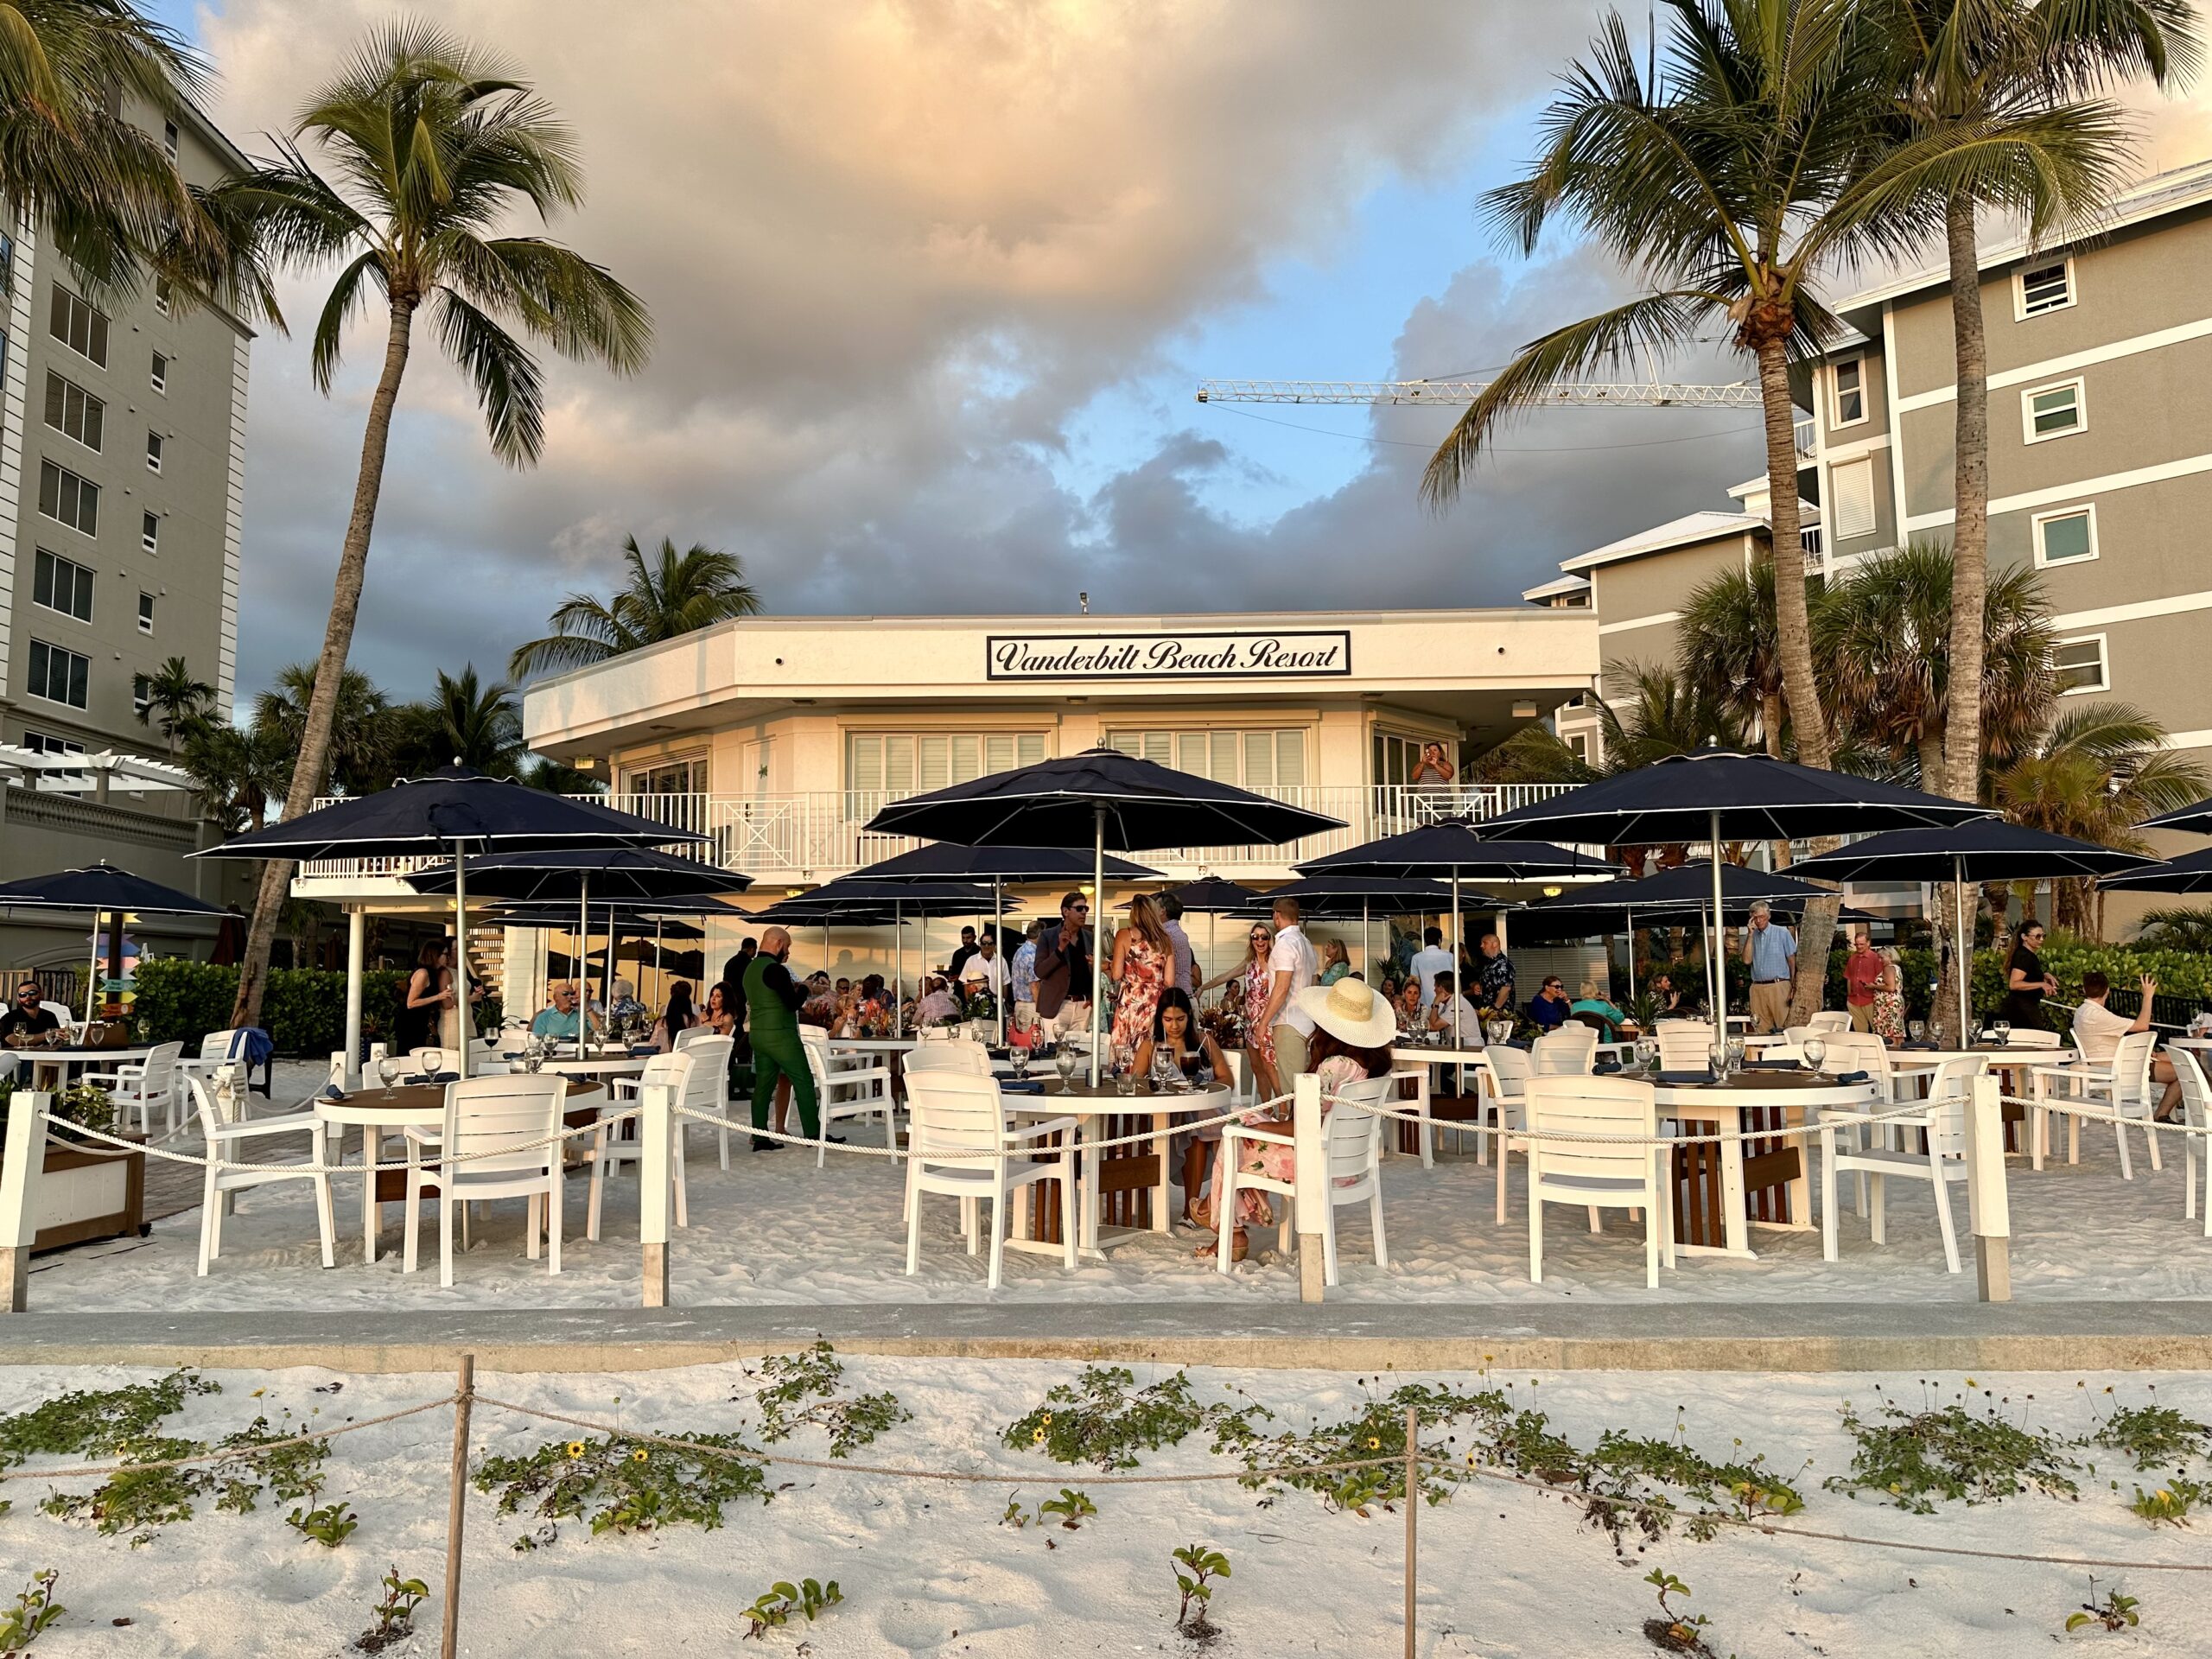 The Turtle Club reopened after being damaged by Hurricane Ian in 2022.